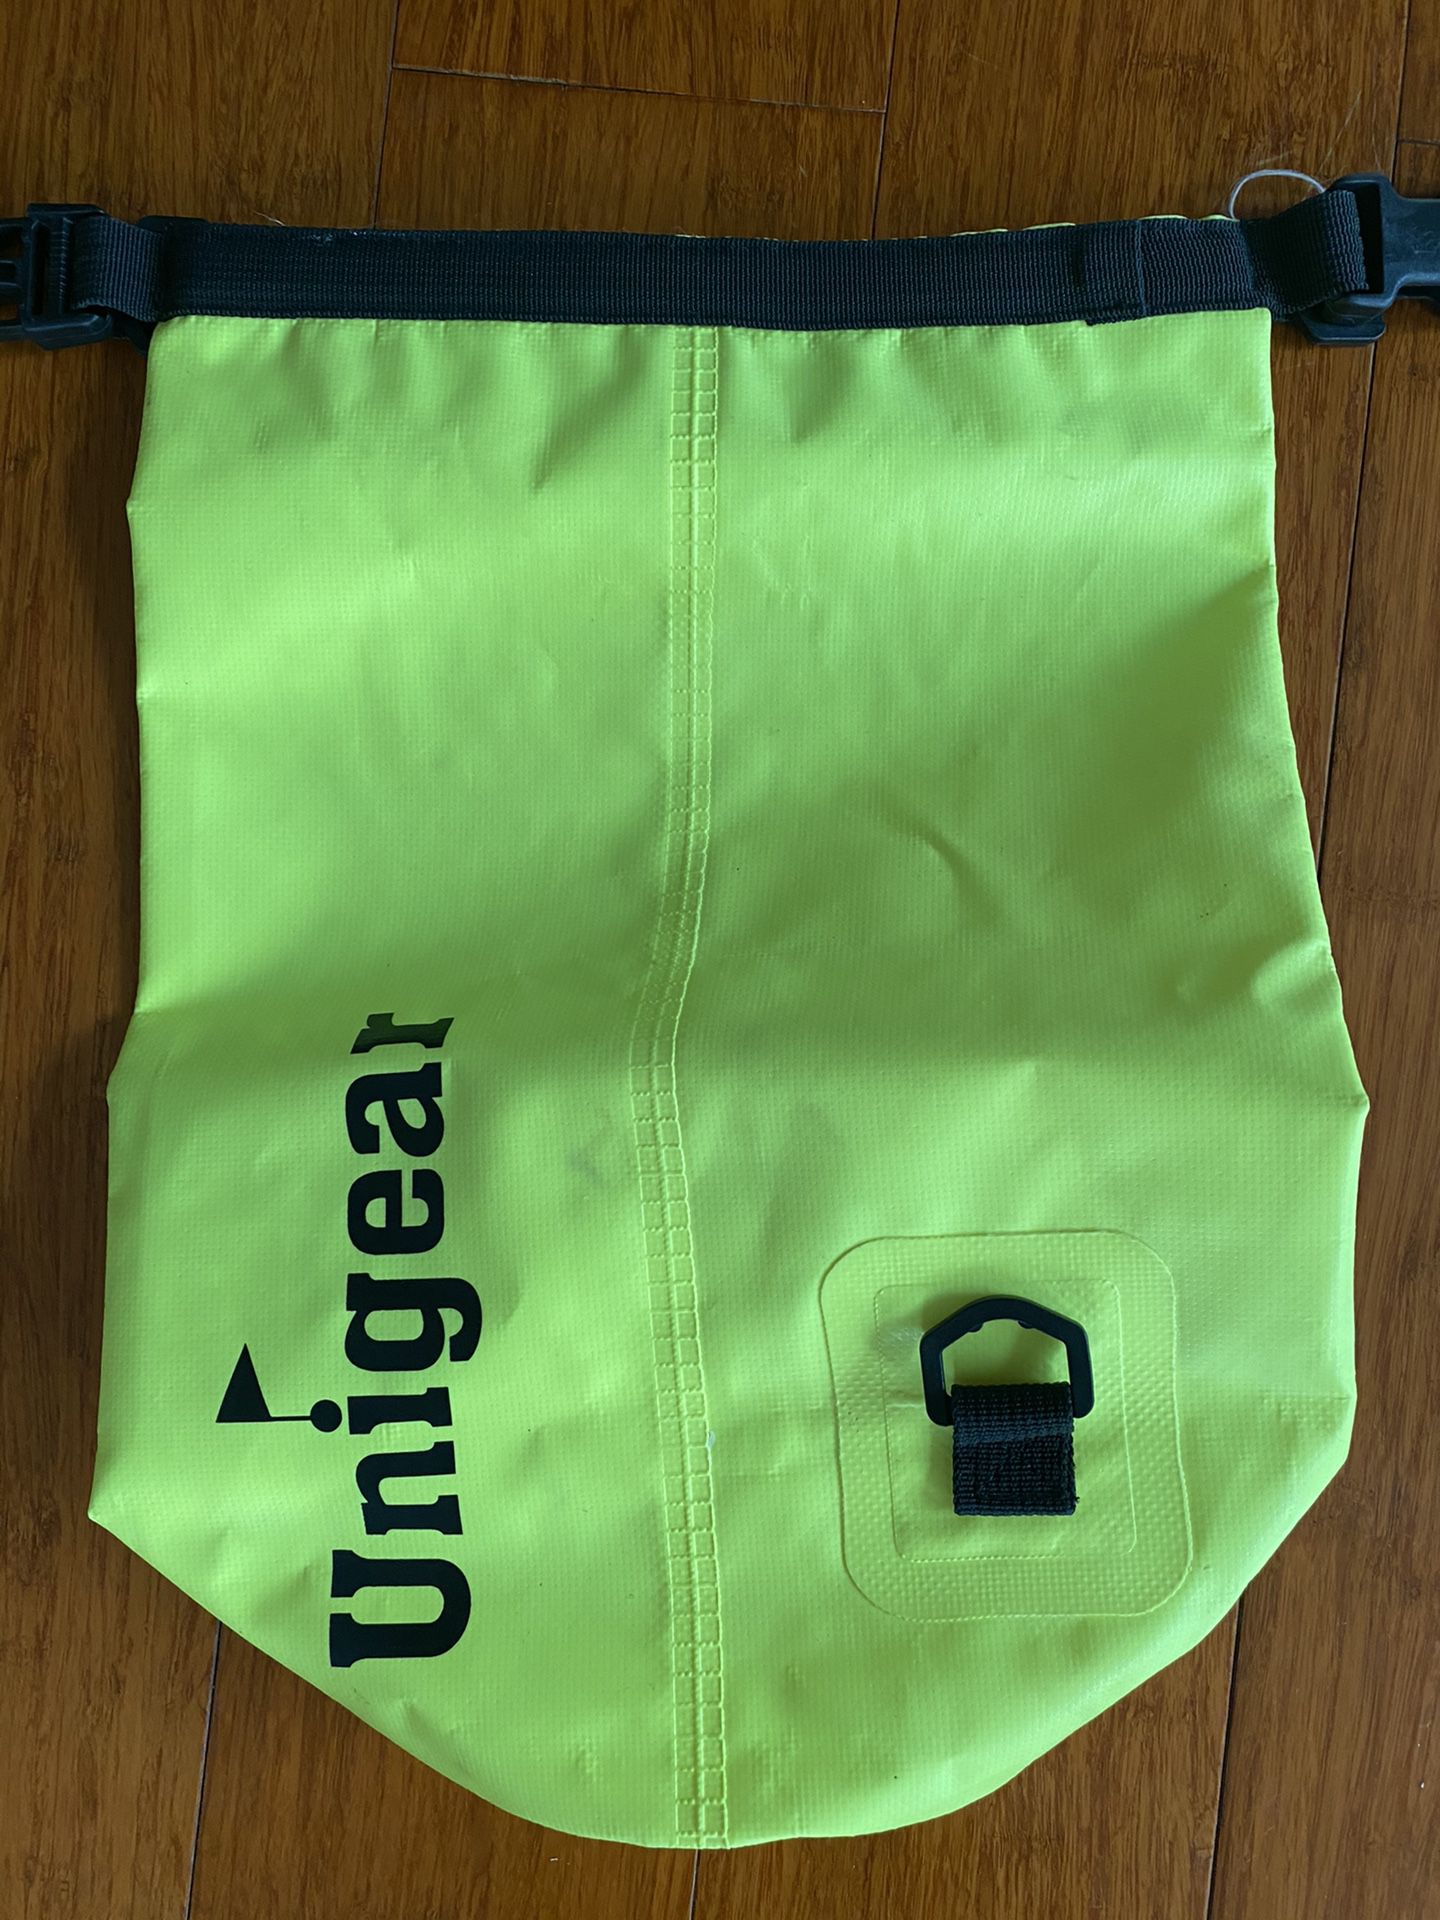 Visit the Unigear Store 4,510 Unigear Dry Bag Waterproof, Floating and Lightweight Bags for Kayaking, Boating, Fishing, Swimming and Camping $5